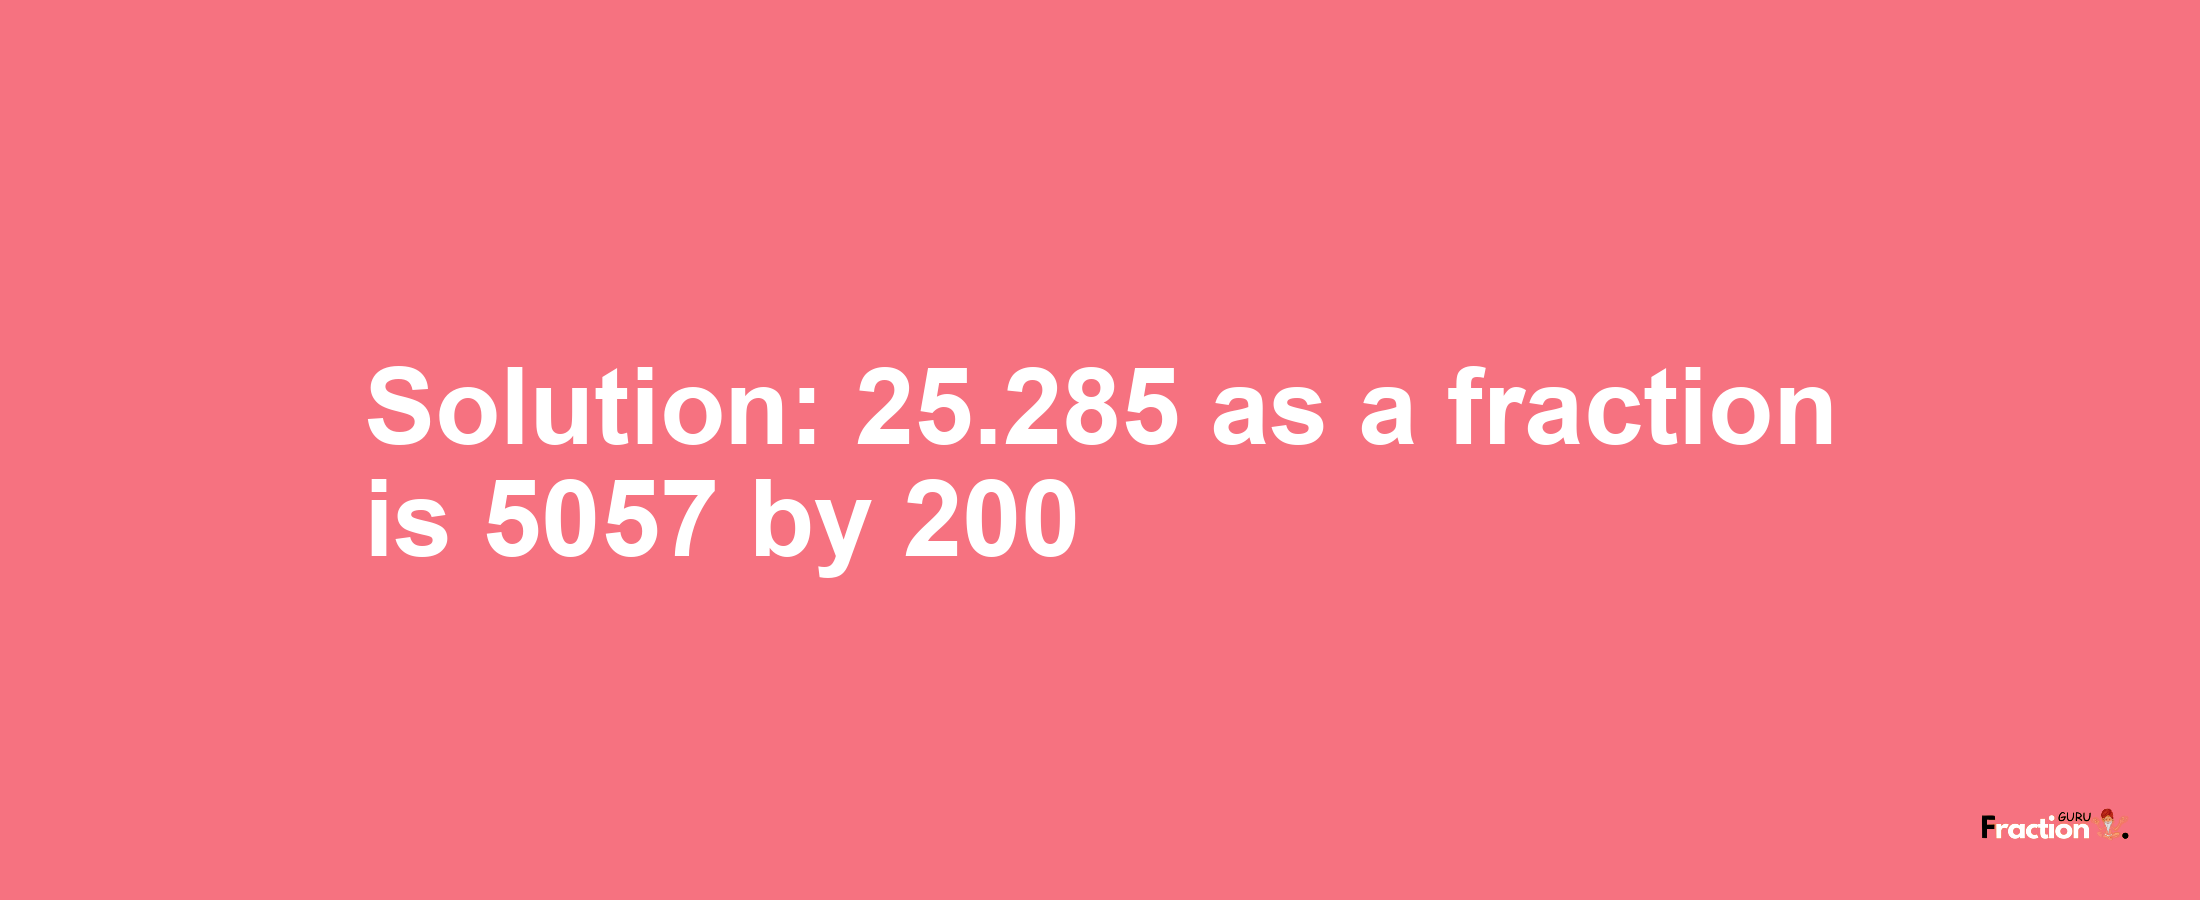 Solution:25.285 as a fraction is 5057/200